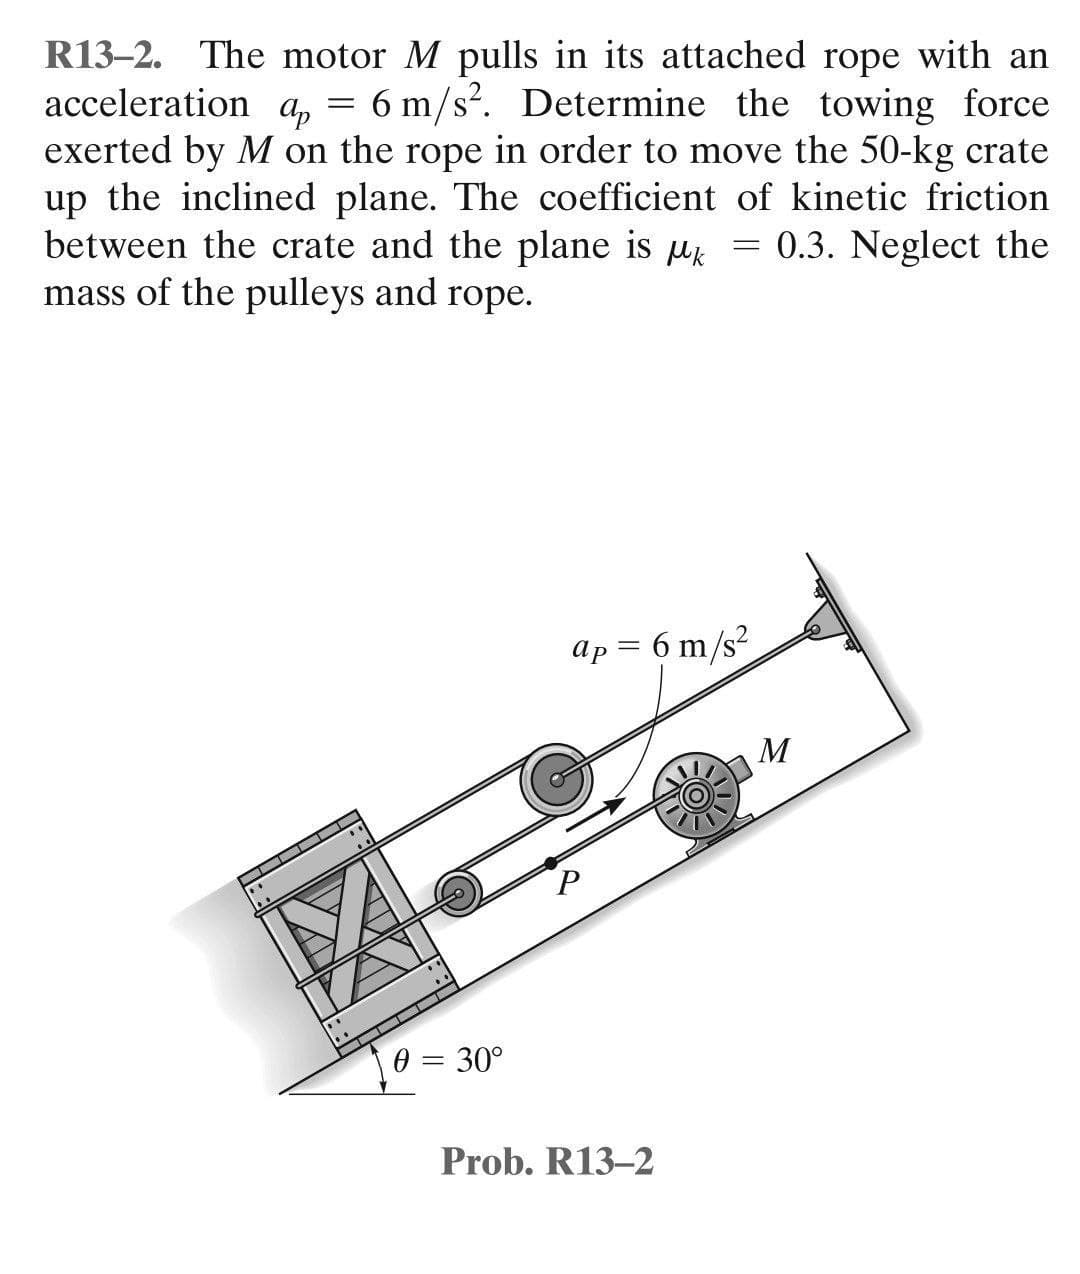 R13-2. The motor M pulls in its attached rope with an
acceleration q = 6 m/s². Determine the towing force
ар
exerted by M on the rope in order to move the 50-kg crate
up the inclined plane. The coefficient of kinetic friction
between the crate and the plane is k 0.3. Neglect the
mass of the pulleys and rope.
=
ap = 6 m/s²
0 = 30°
Prob. R13-2
M